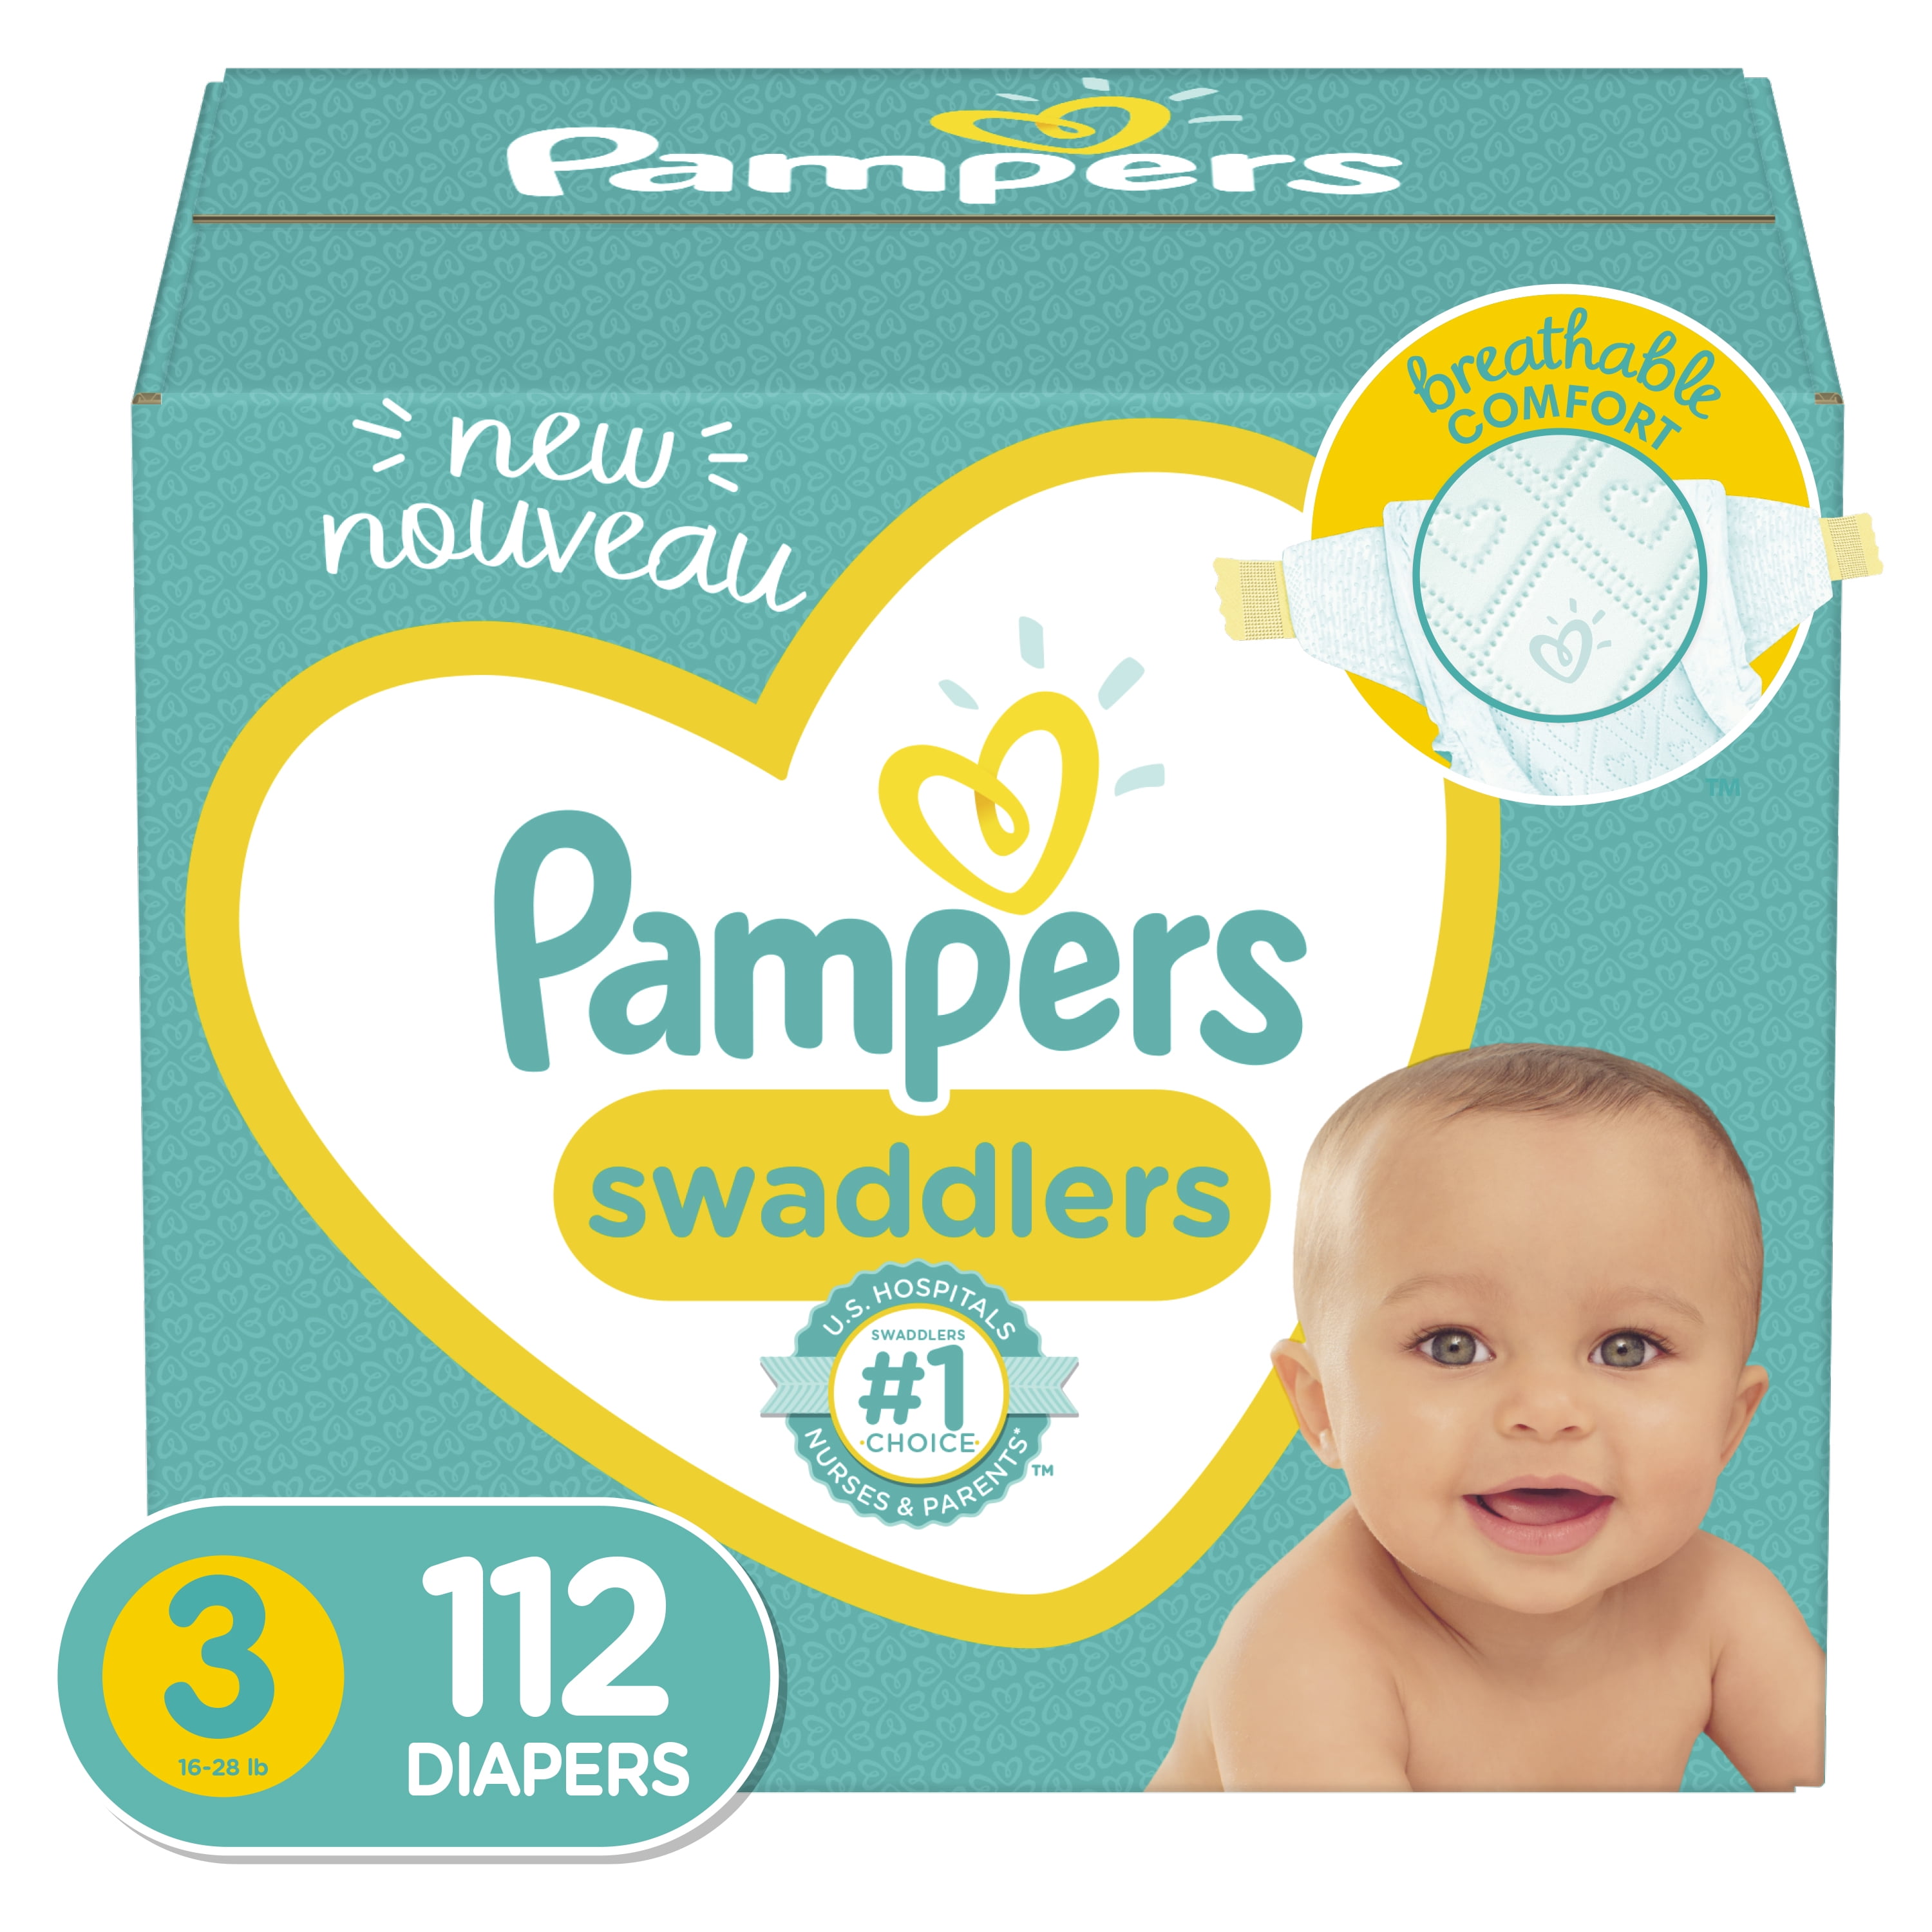 Giant Pampers Swaddlers Disposable Baby Diapers 112 Count Diapers Size 3 